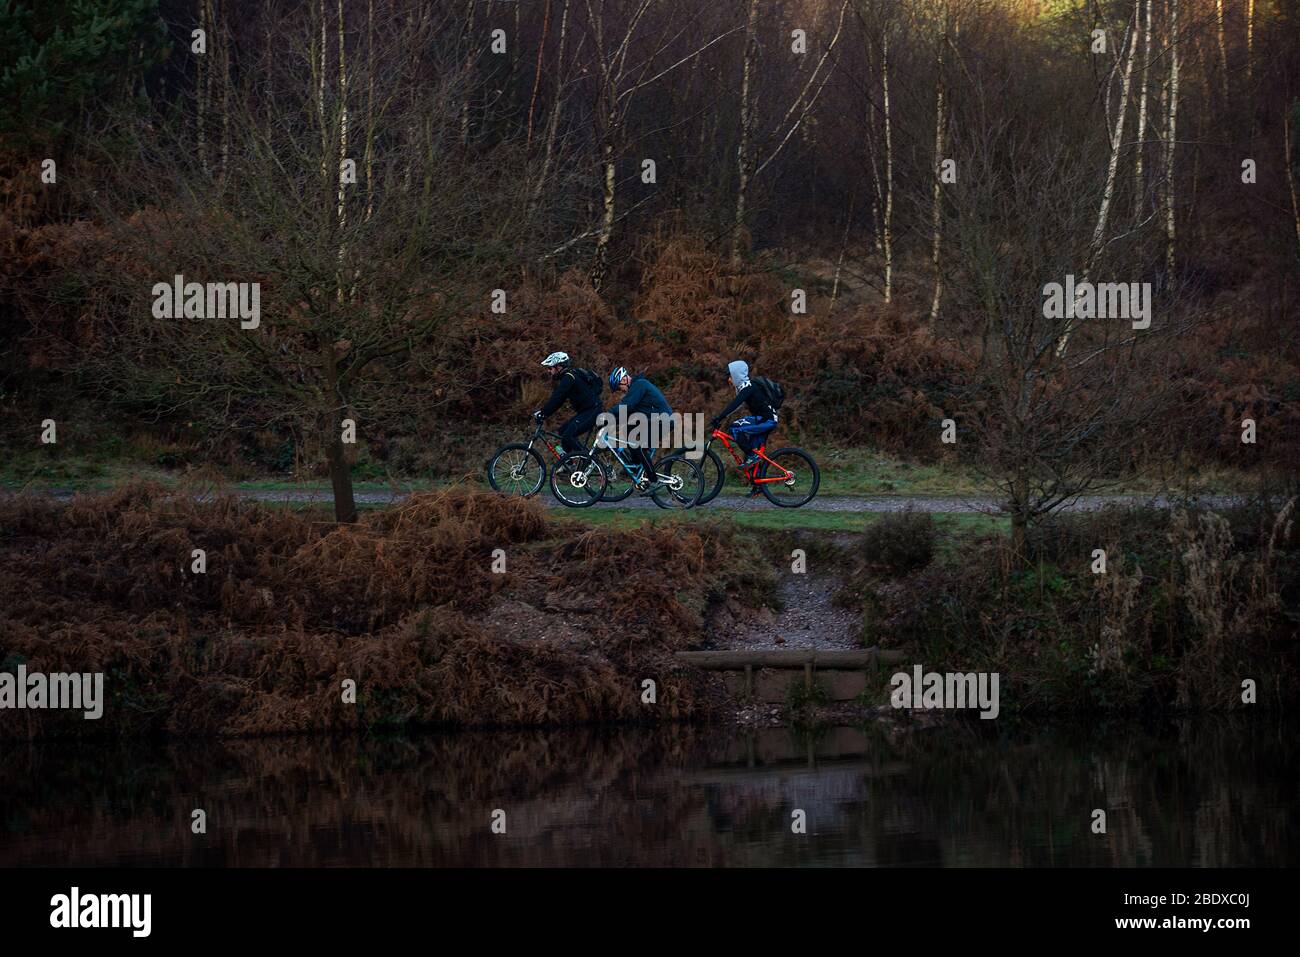 Three friends on mountain bikes cycle along a bike track in Cannock Chase forest, England. Stock Photo